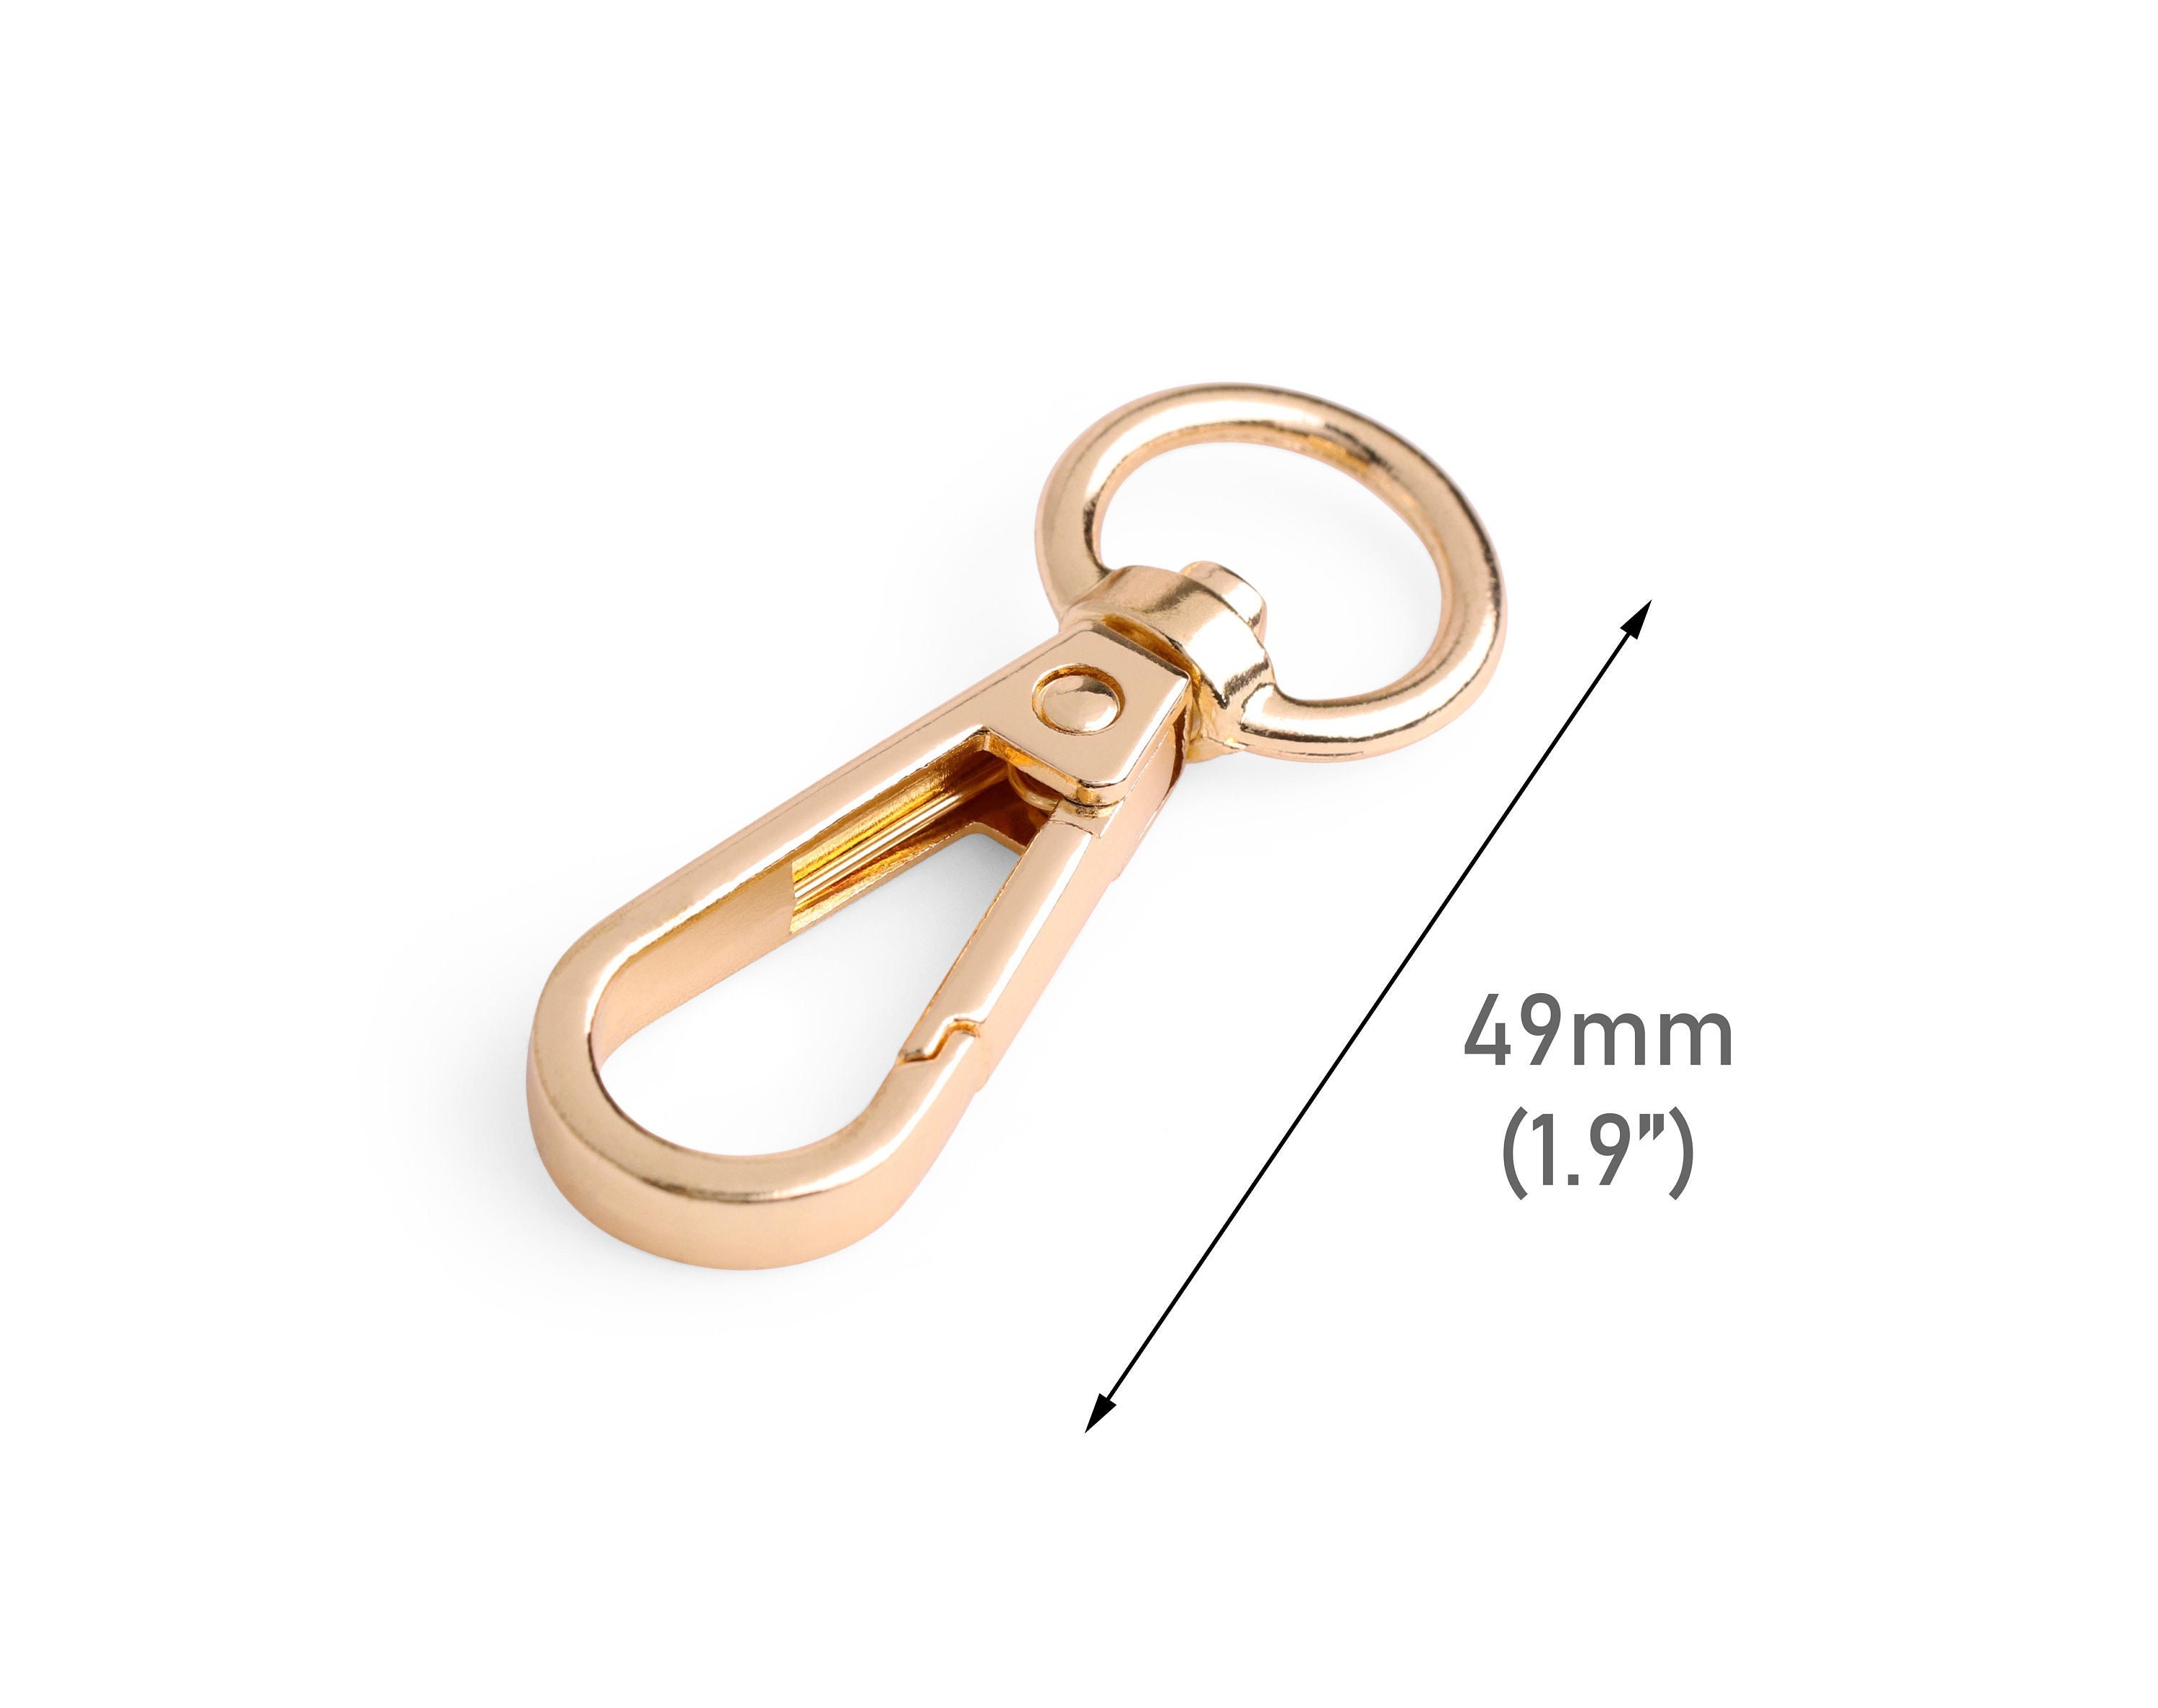 Buy 2 Gold Snap Hooks With Swivel for Bags, 1.9 Inch, Metal, Large Clips, Purse  Strap Attacher Rings, Designer Hardware Closures, RG133-49-GP Online in  India 